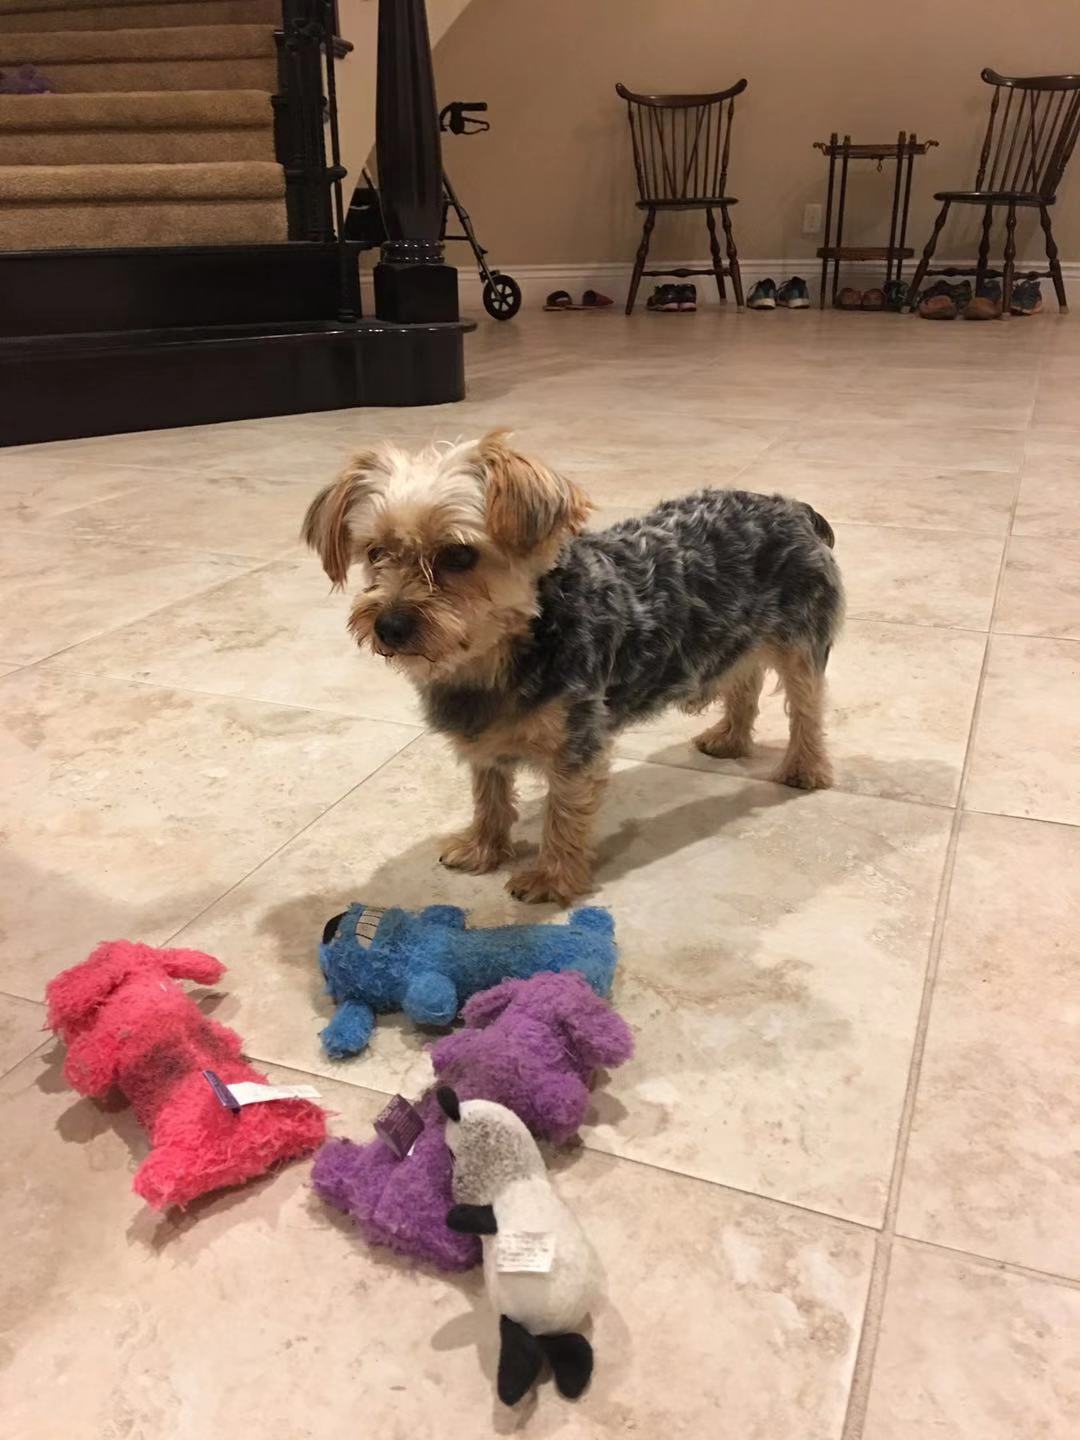 cute picture my Yorkie dog, Teddie with his toys